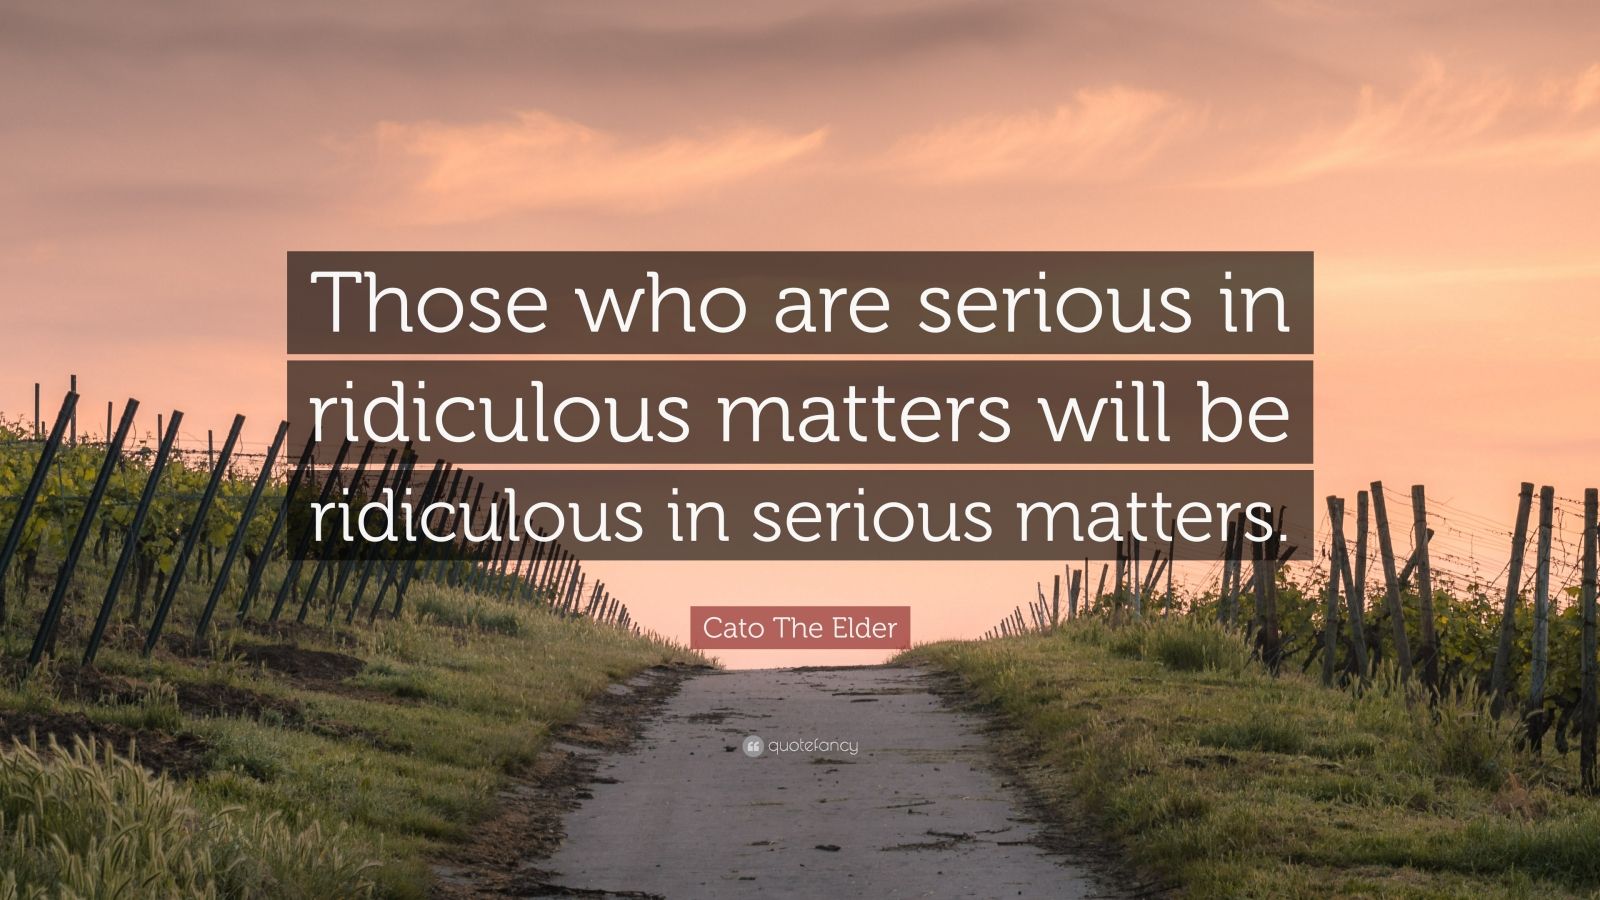 Cato The Elder Quote: "Those who are serious in ridiculous ...